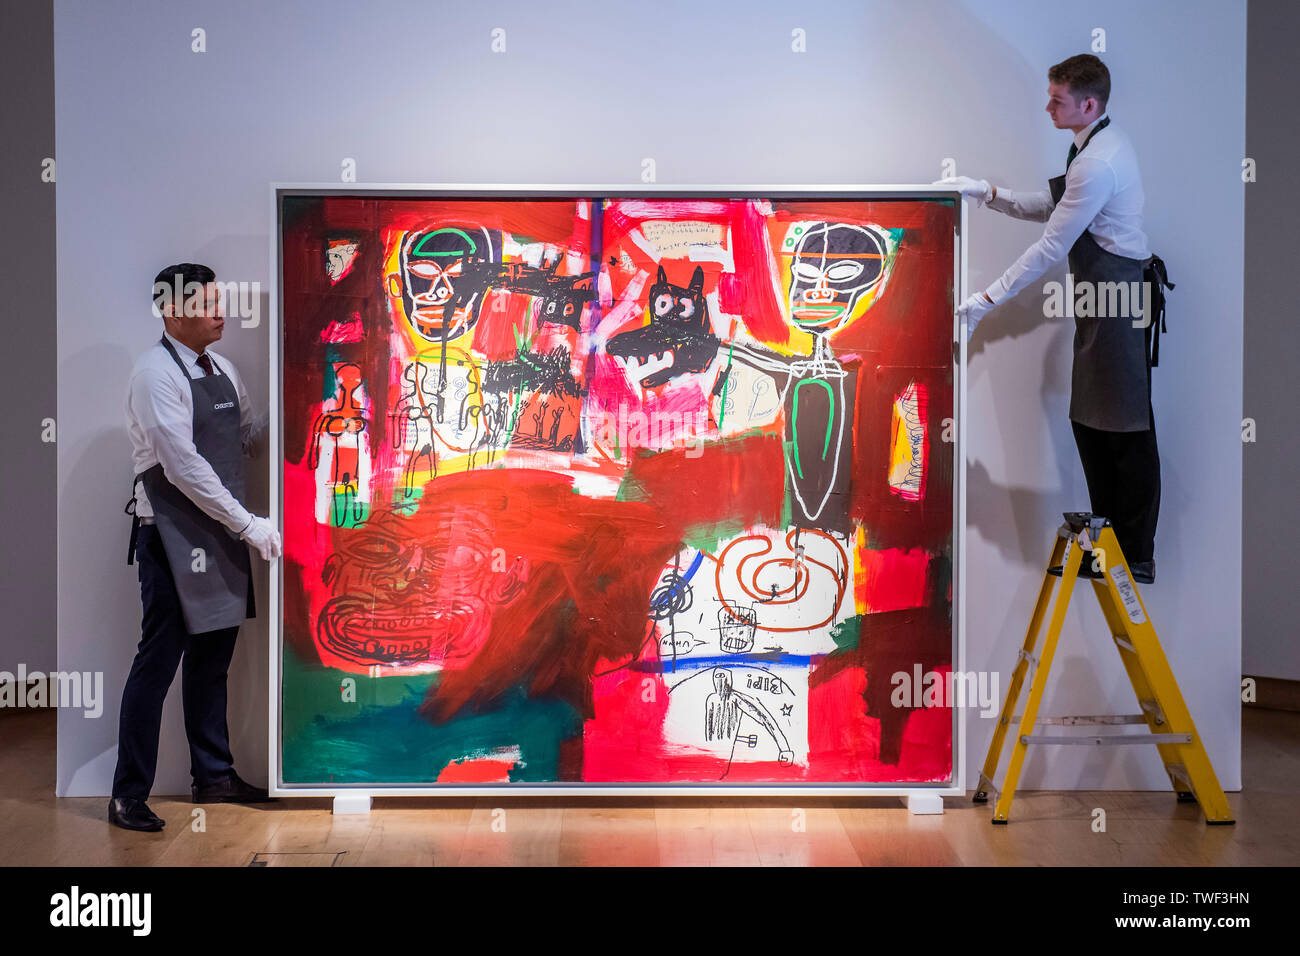 London, UK. 20th June, 2019. Jean-Michel Basquiat (1960-1988), Sabado por la Noche (Saturday Night), 1984, Estimate: £7,500,000-11,000,000 - Christie’s presented an exhibition of works from its upcoming Post-War and Contemporary Art Evening Auction. It will be on view to the public from 21 to 25 June 2019. Credit: Guy Bell/Alamy Live News Stock Photo